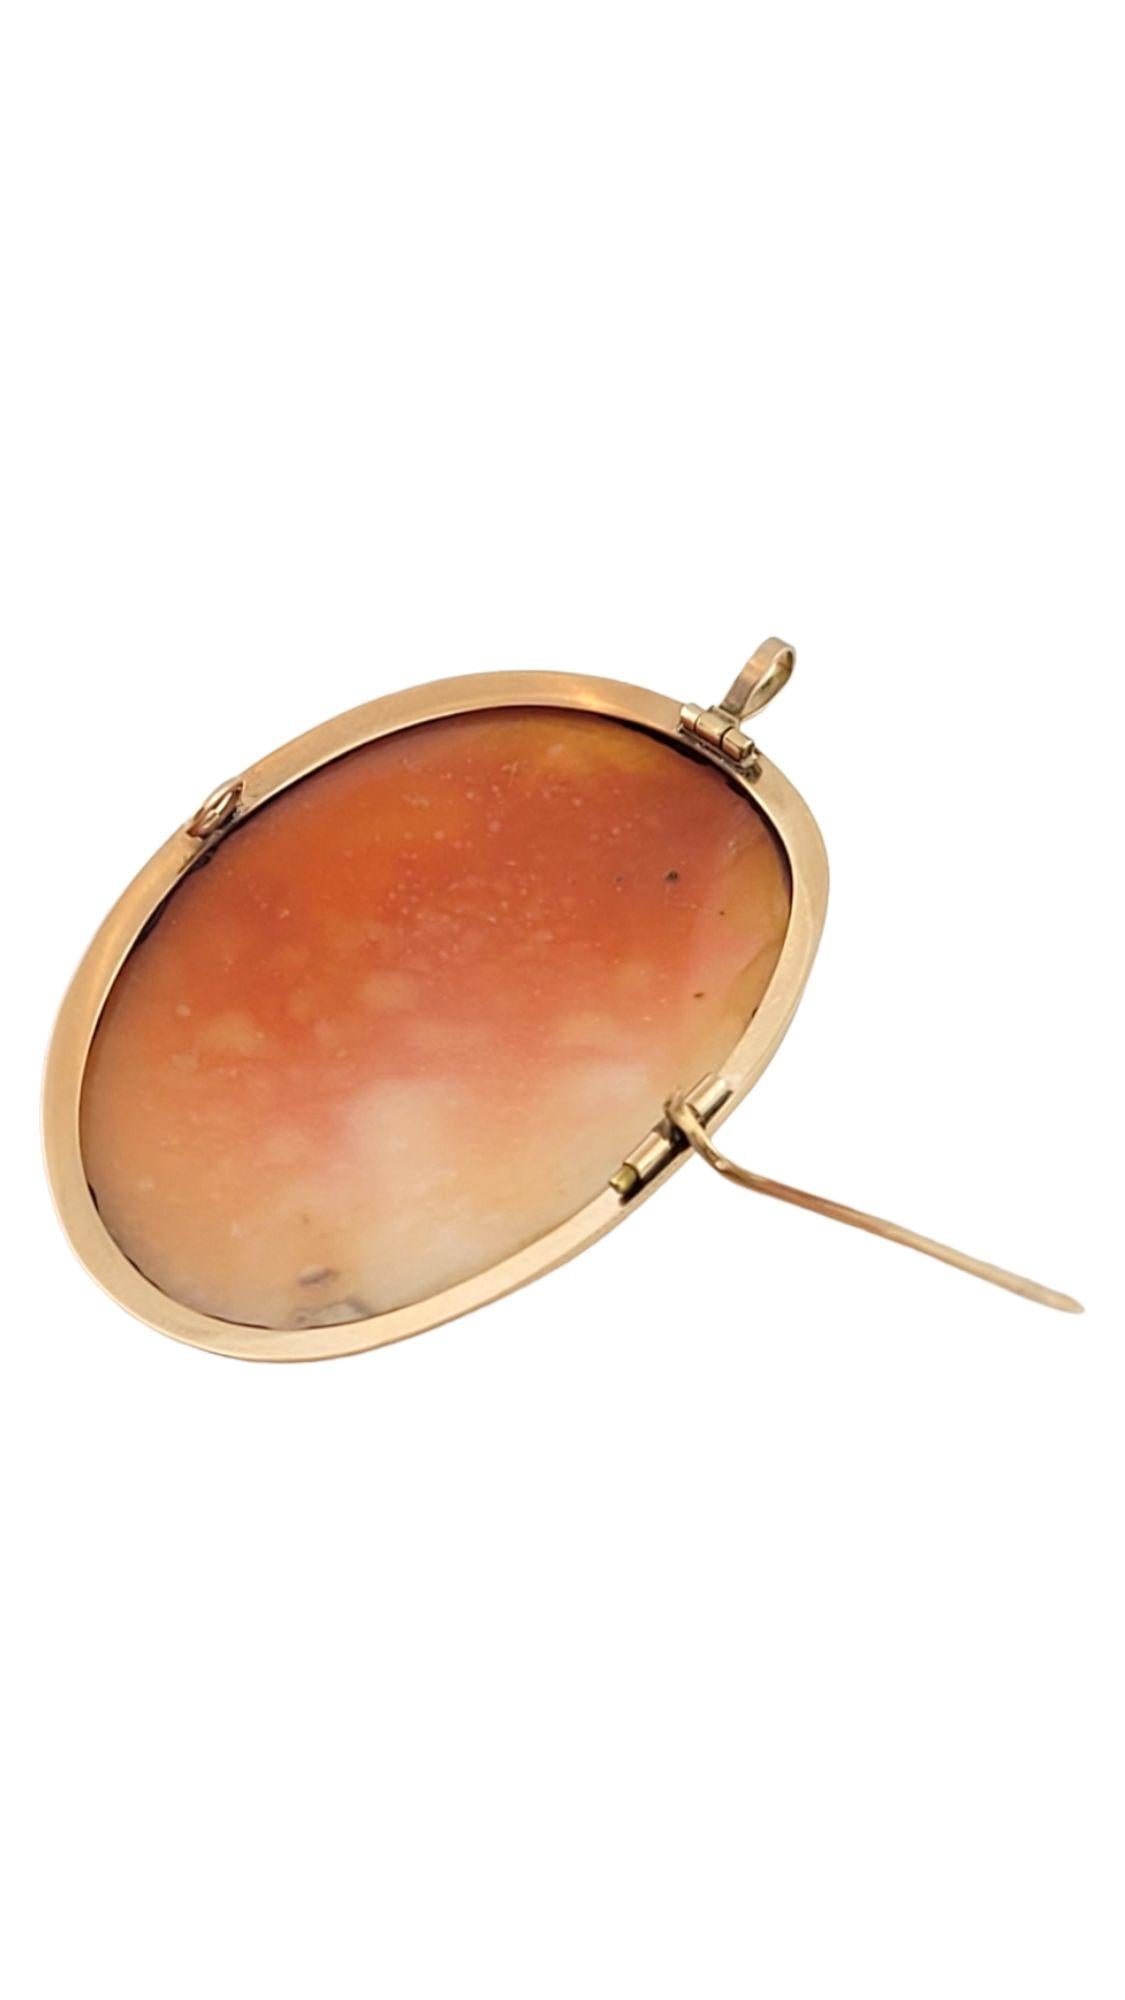 Women's 14K Yellow Gold Cameo Pin/Pendant #14568 For Sale